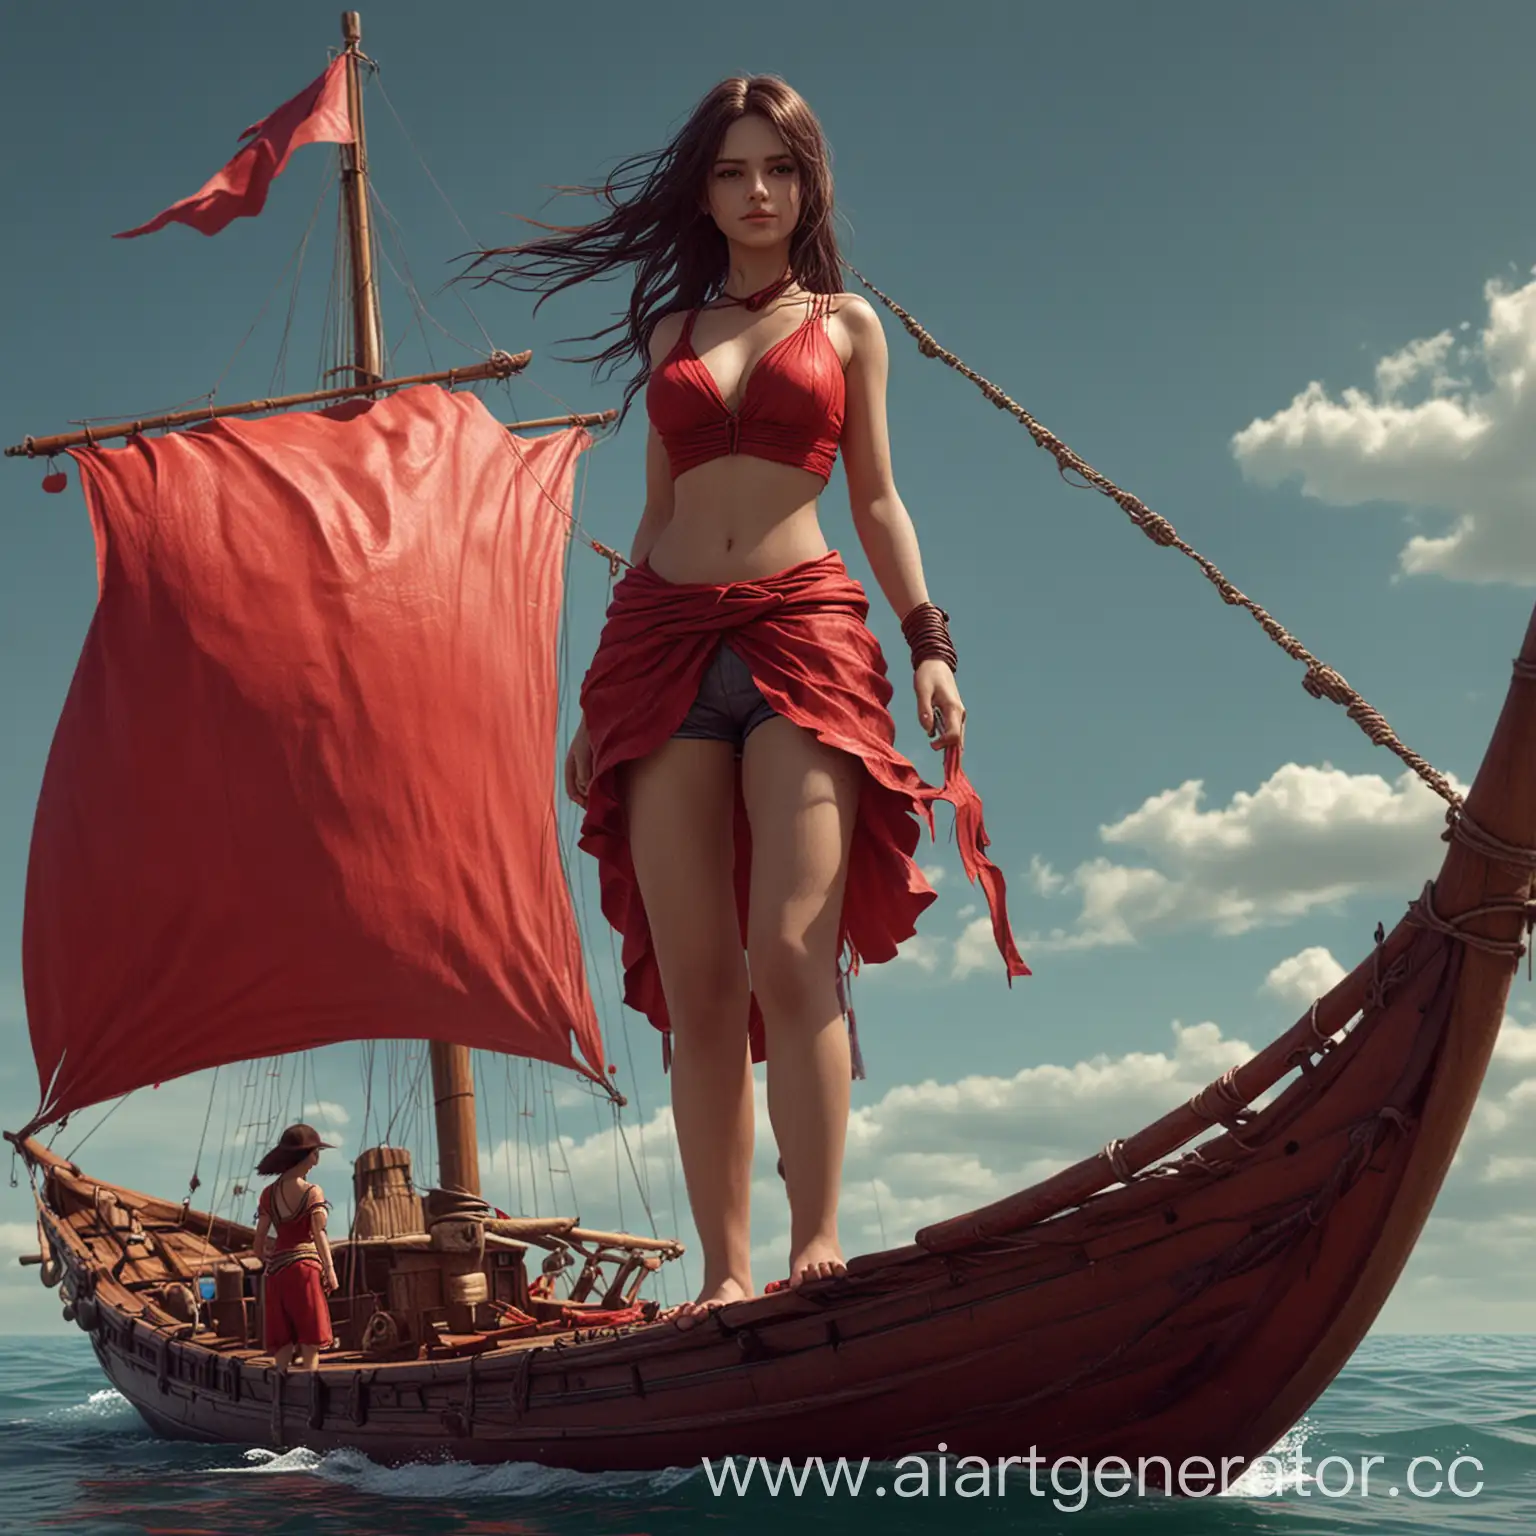 3D-Rendering-of-a-Girl-with-Tiger-and-Crimson-Sails